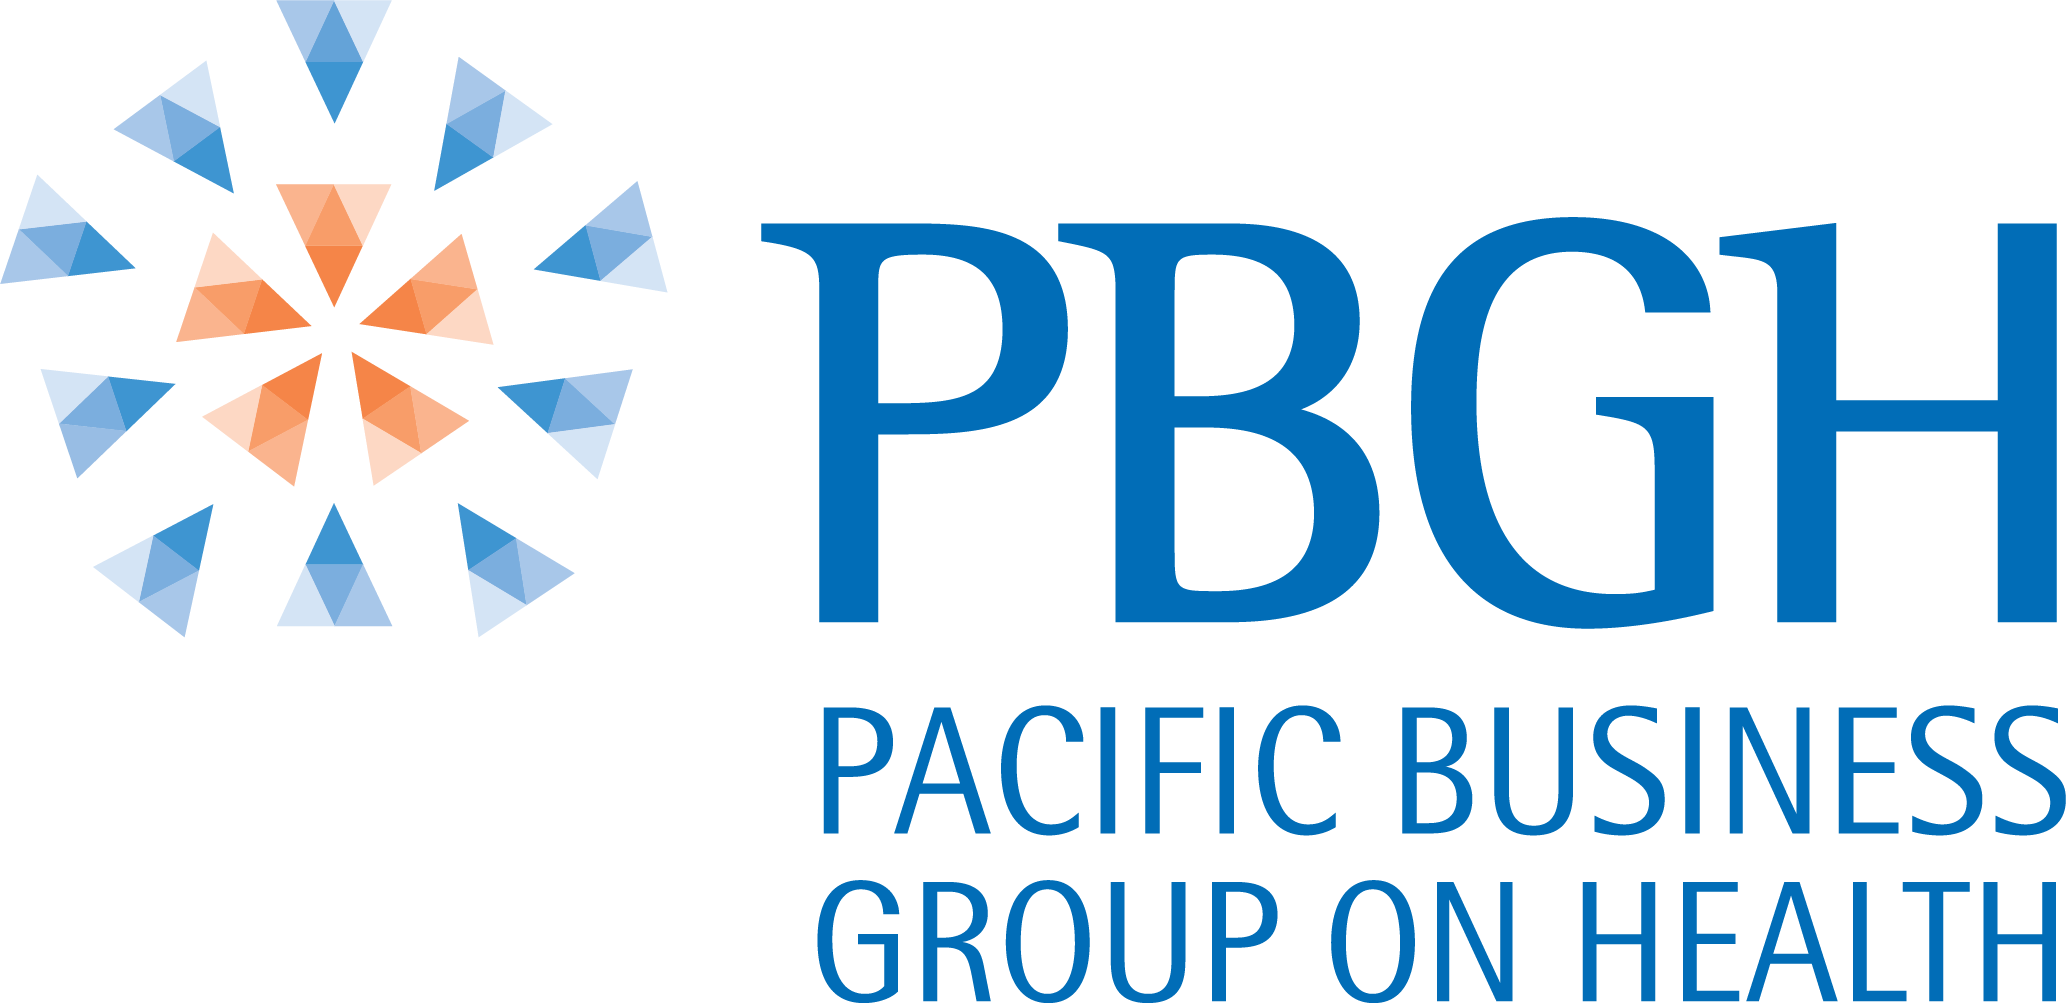 PACIFIC BUSINESS GRO